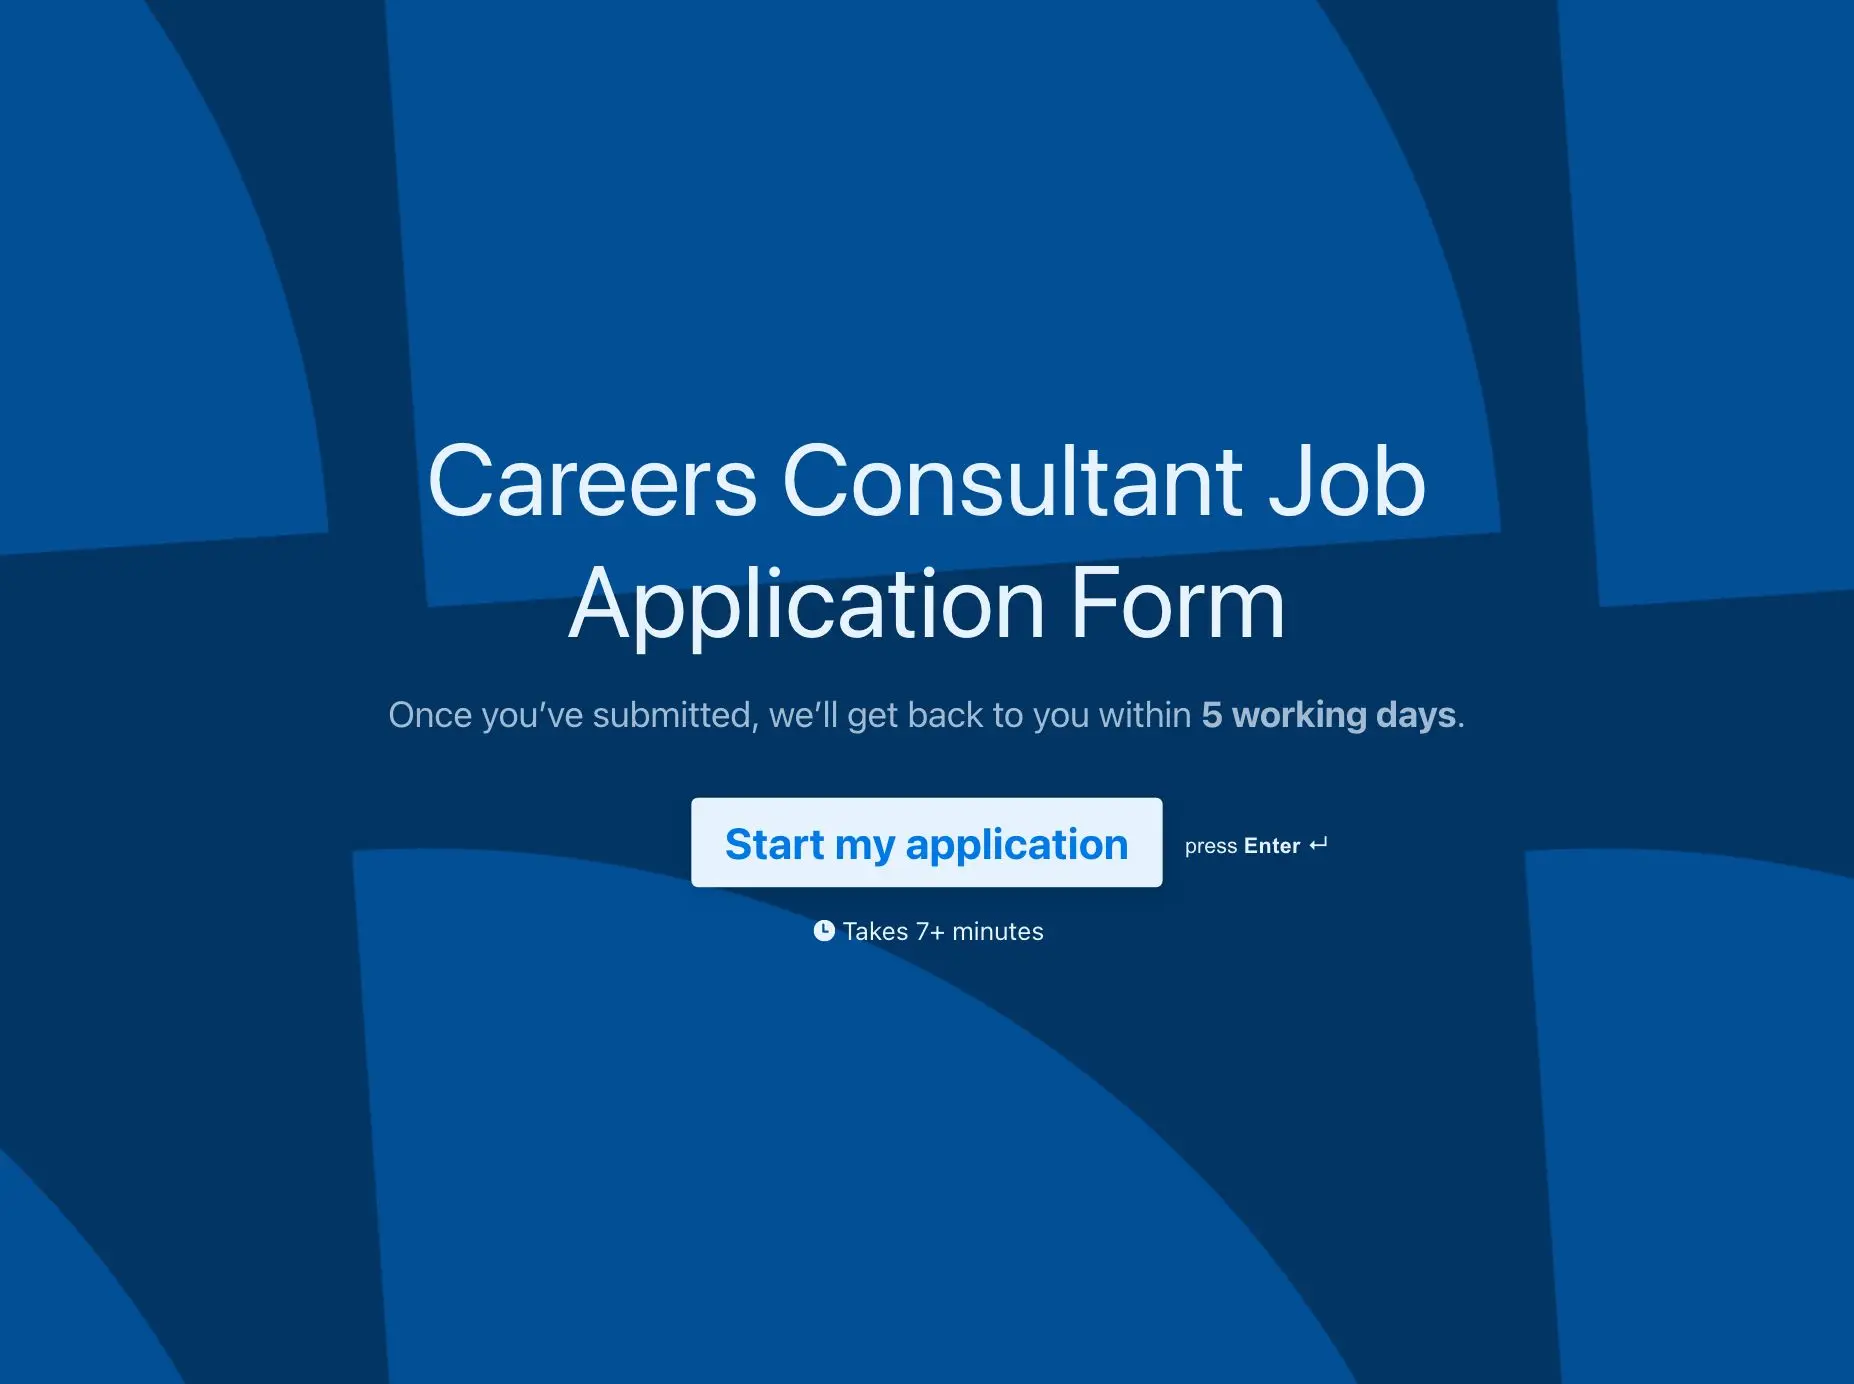 Careers Consultant Job Application Form Template Hero